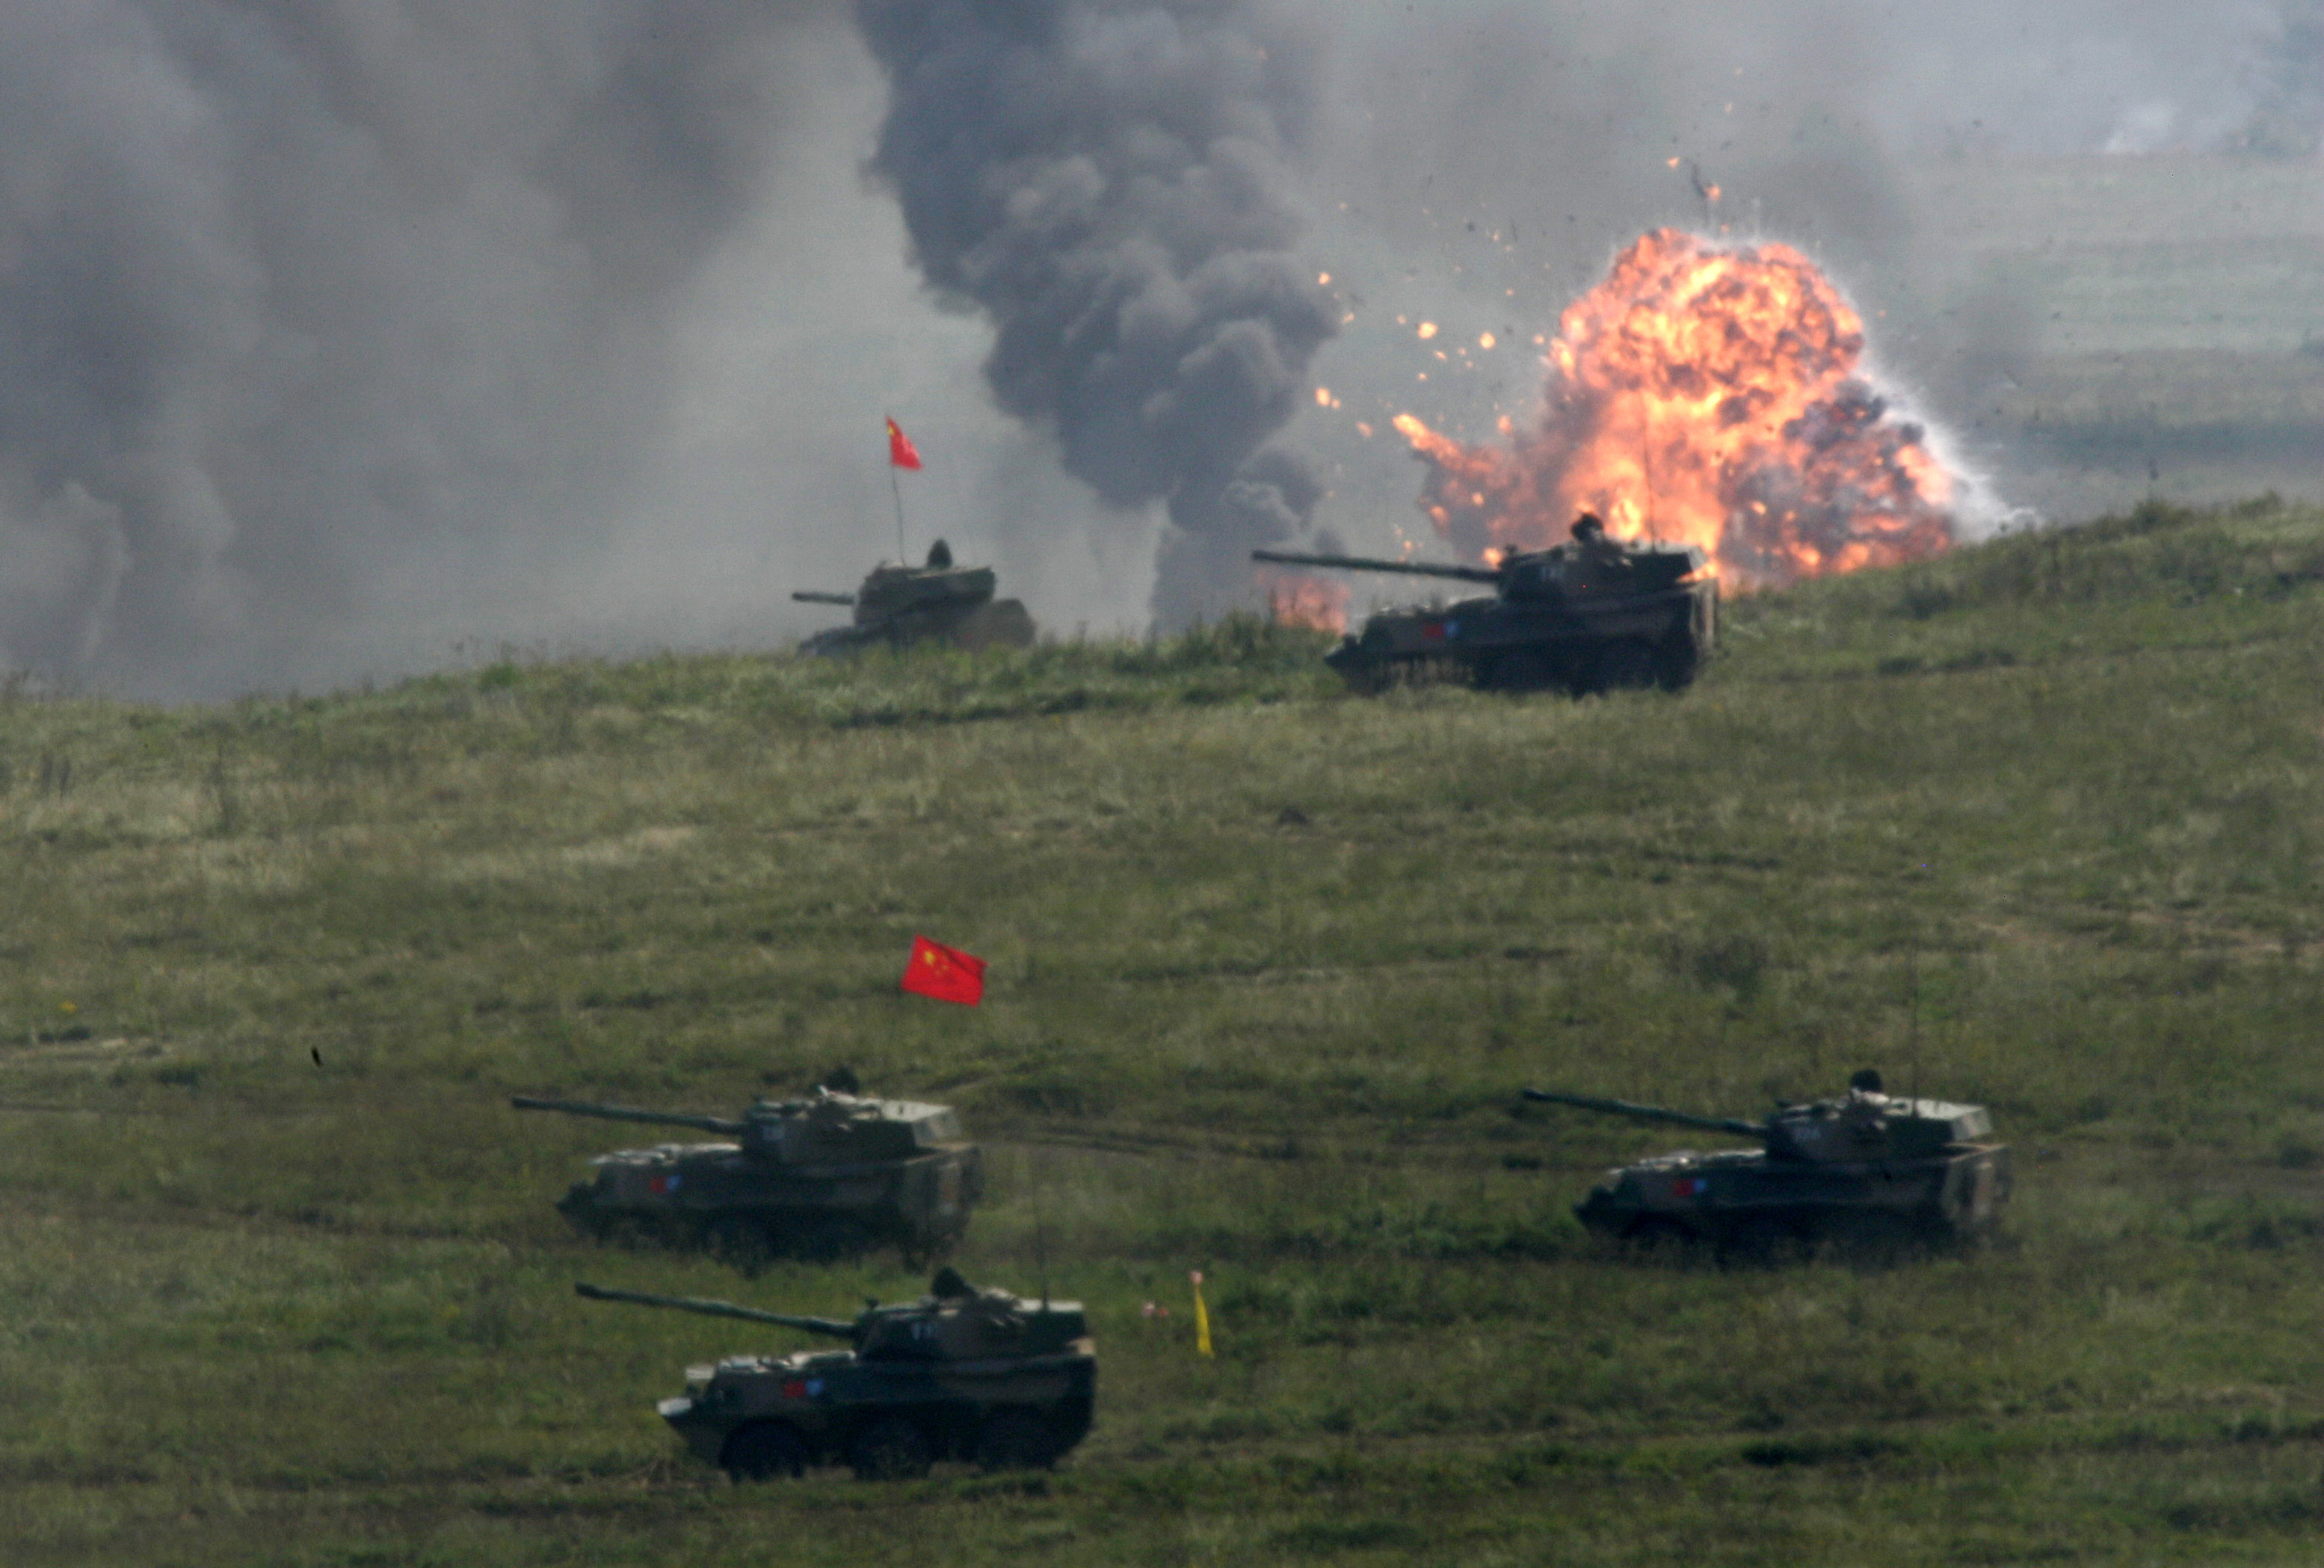 Chinese self-propelled howitzers move across a field during joint military exercises at Chebarkul testing range on Friday, Aug. 17, 2007. Russian and Chinese forces on Friday held their first joint maneuvers on Russia's territory _ an exercise intended to demonstrate their growing military ties and a shared desire to counter U.S. global clout. The war games in Russia's southern Ural Mountains involved some 6,000 troops from Russia and China and also a handful of soldiers from four ex-Soviet Central Asian nations that are part of the Shanghai Cooperation Organization, a regional group dominated by Moscow and Beijing.  (AP Photo/Ivan Sekretarev)